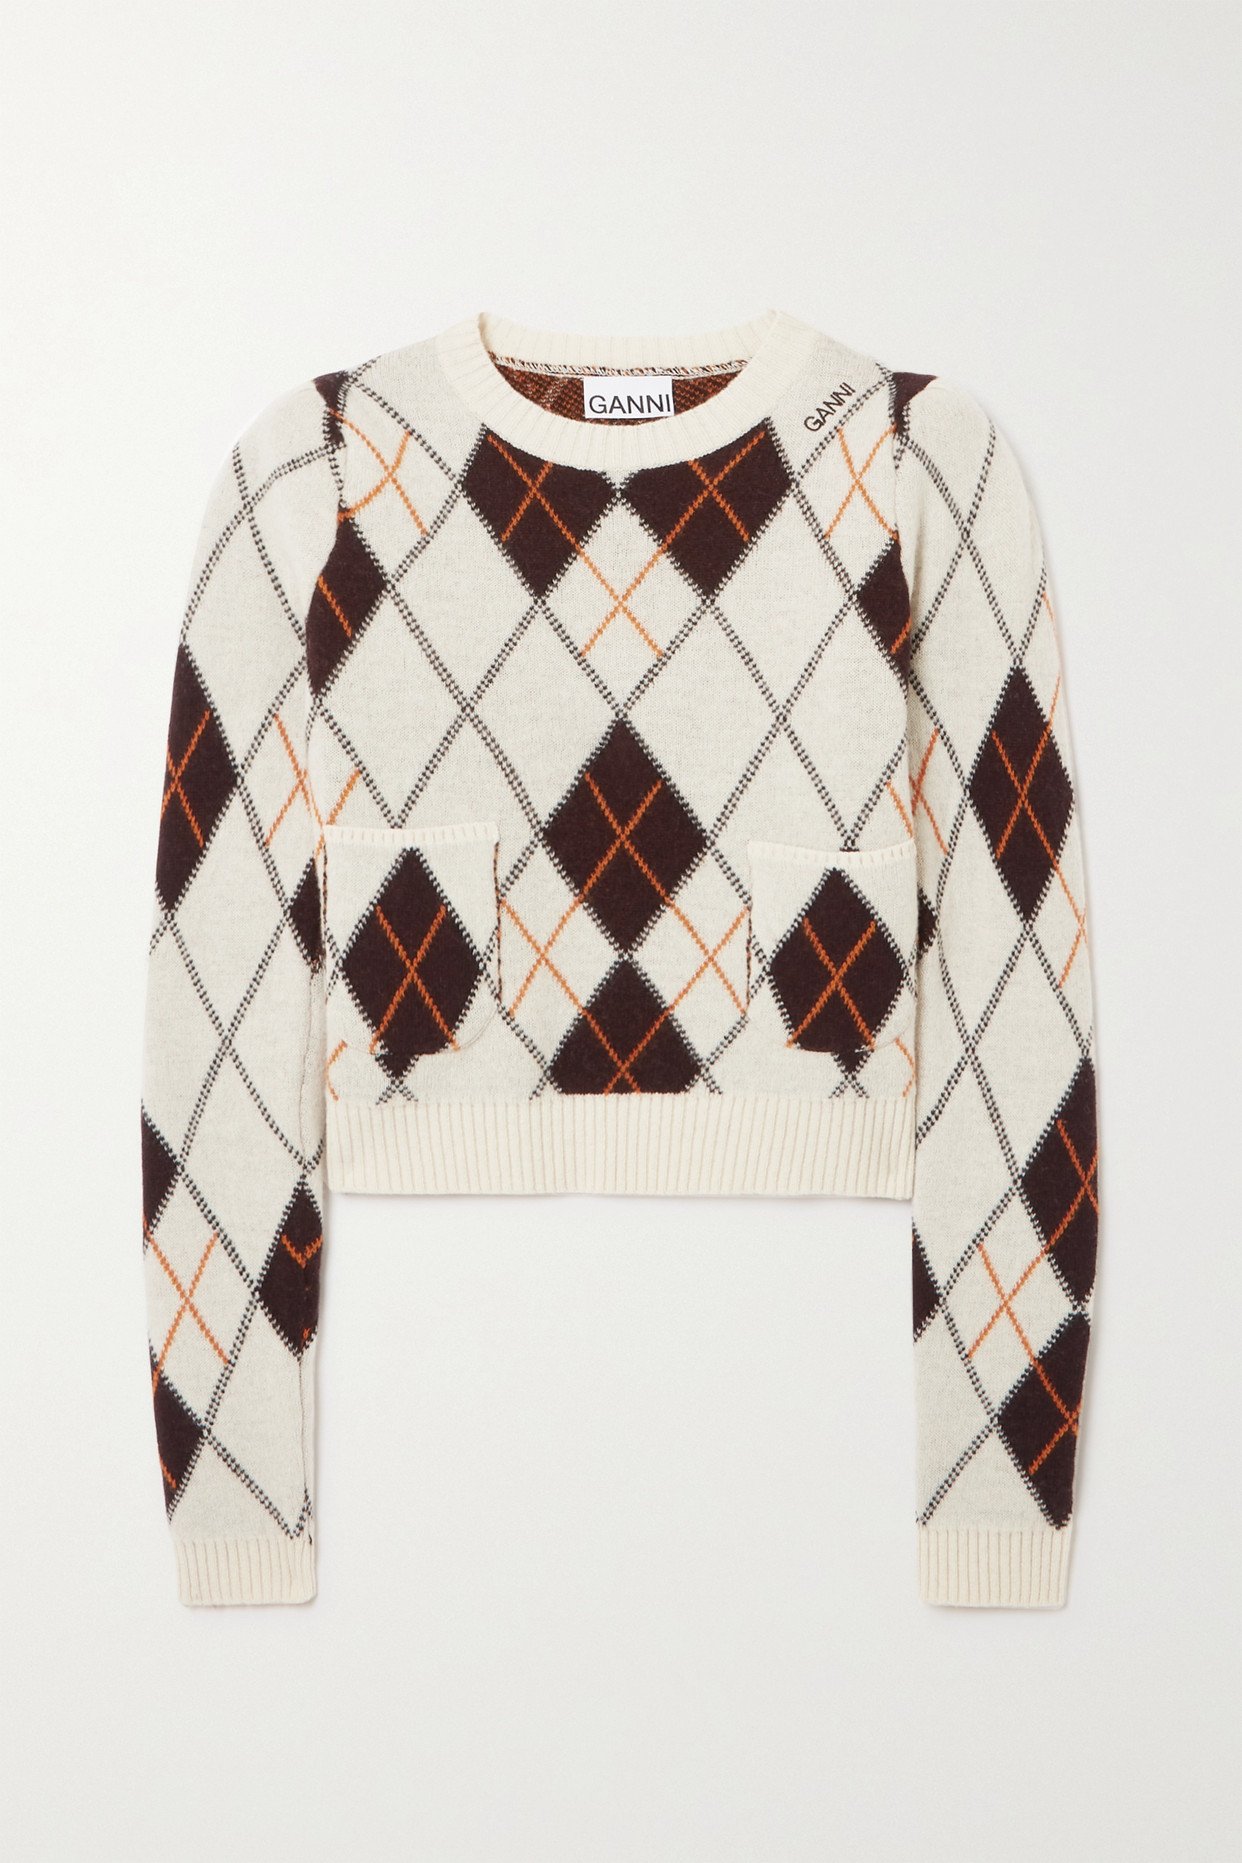 GANNI Argyle Merino Wool And Cashmere-Blend Sweater in Ivory